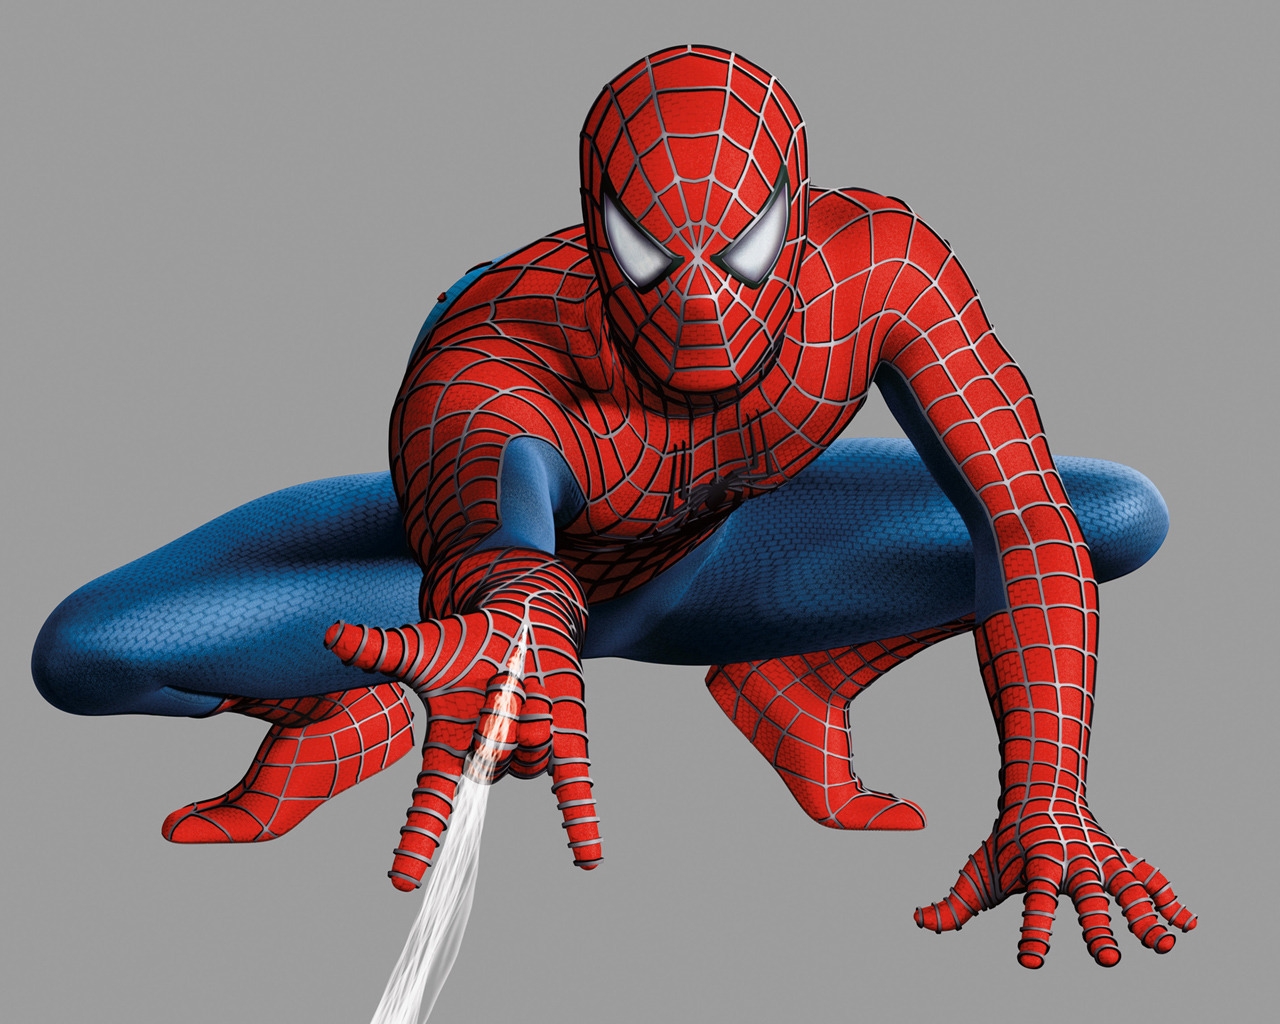 Spiderman 4 for 1280 x 1024 resolution